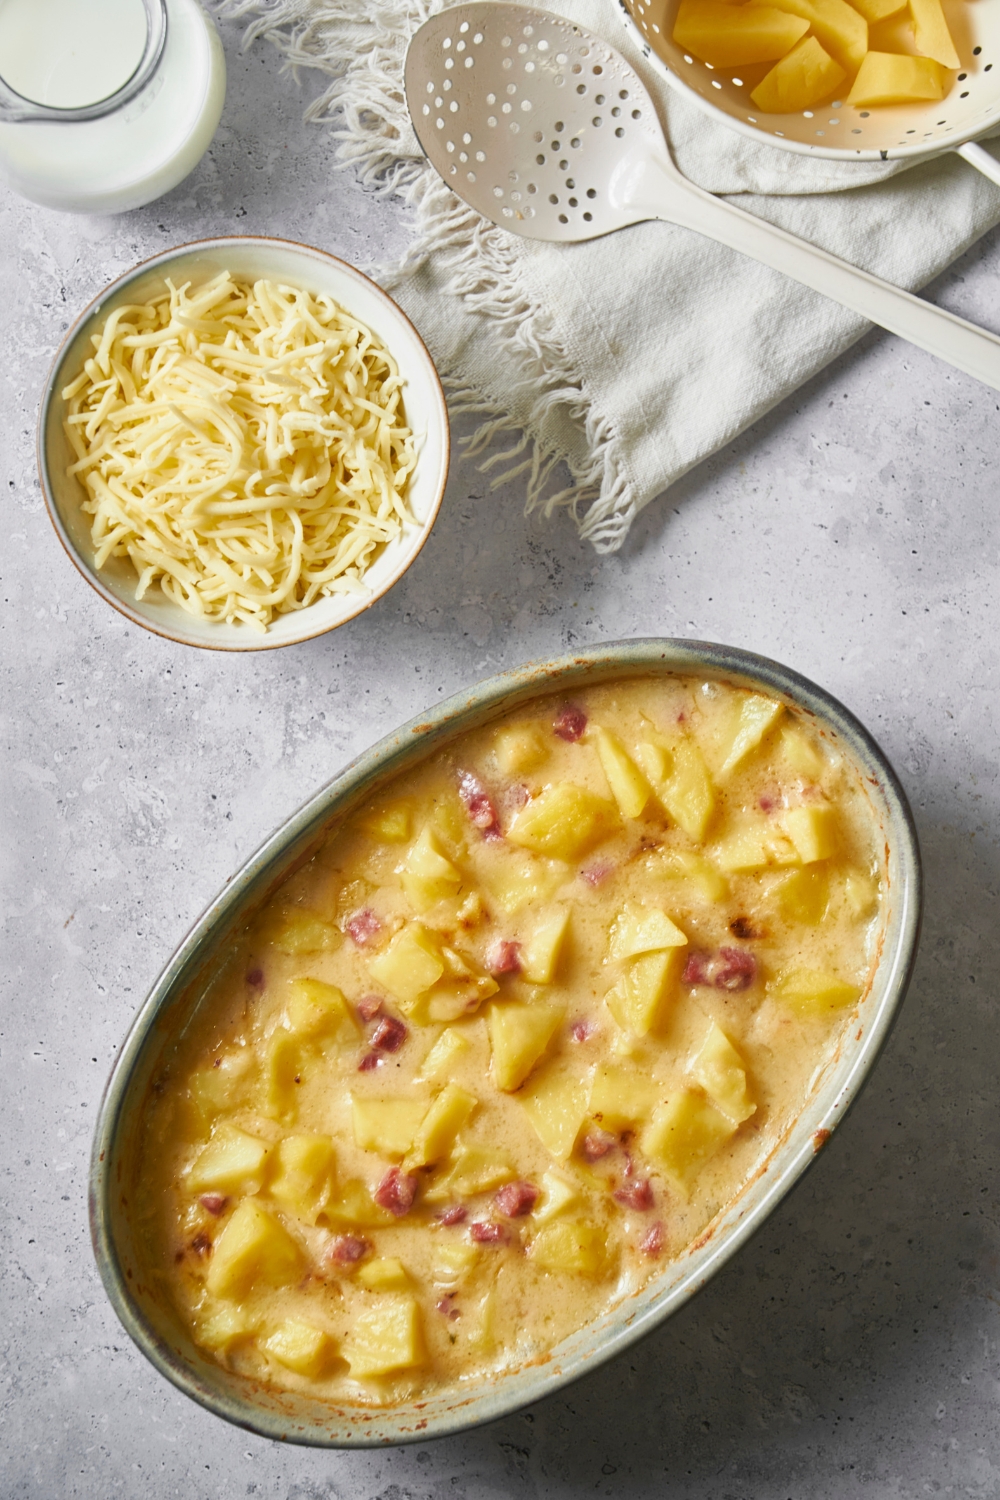 Ham and potato casserole in a large casserole dish, with a bowl of shredded cheese next to the casserole dish.